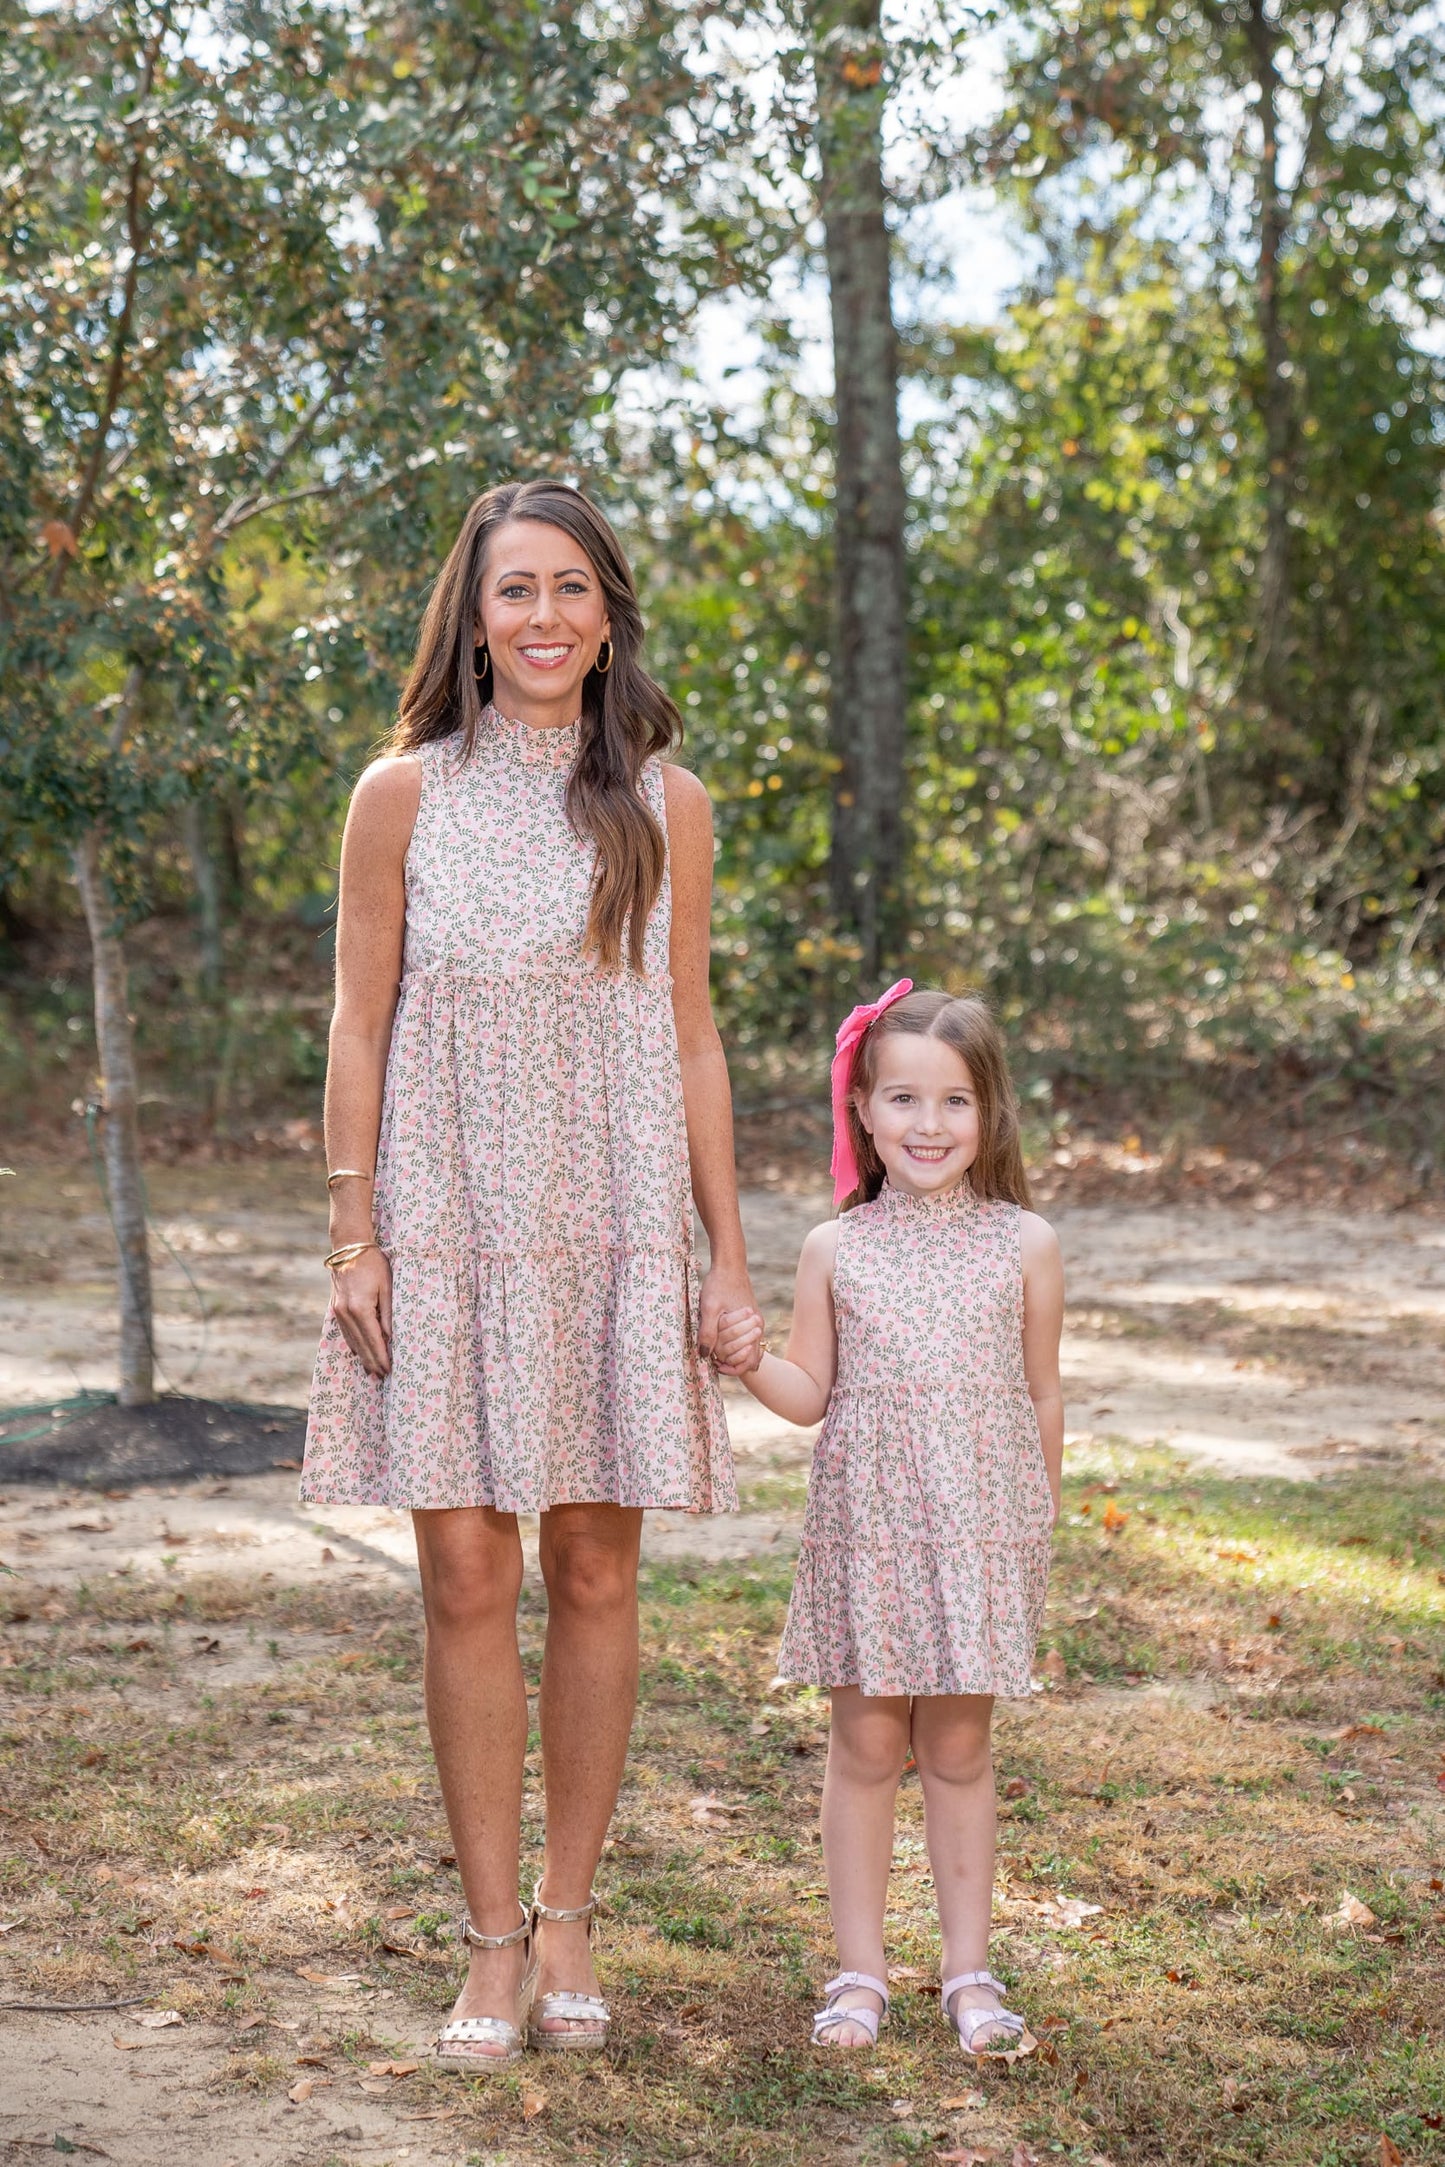 Christa Mom Dress in Pink/Green Floral